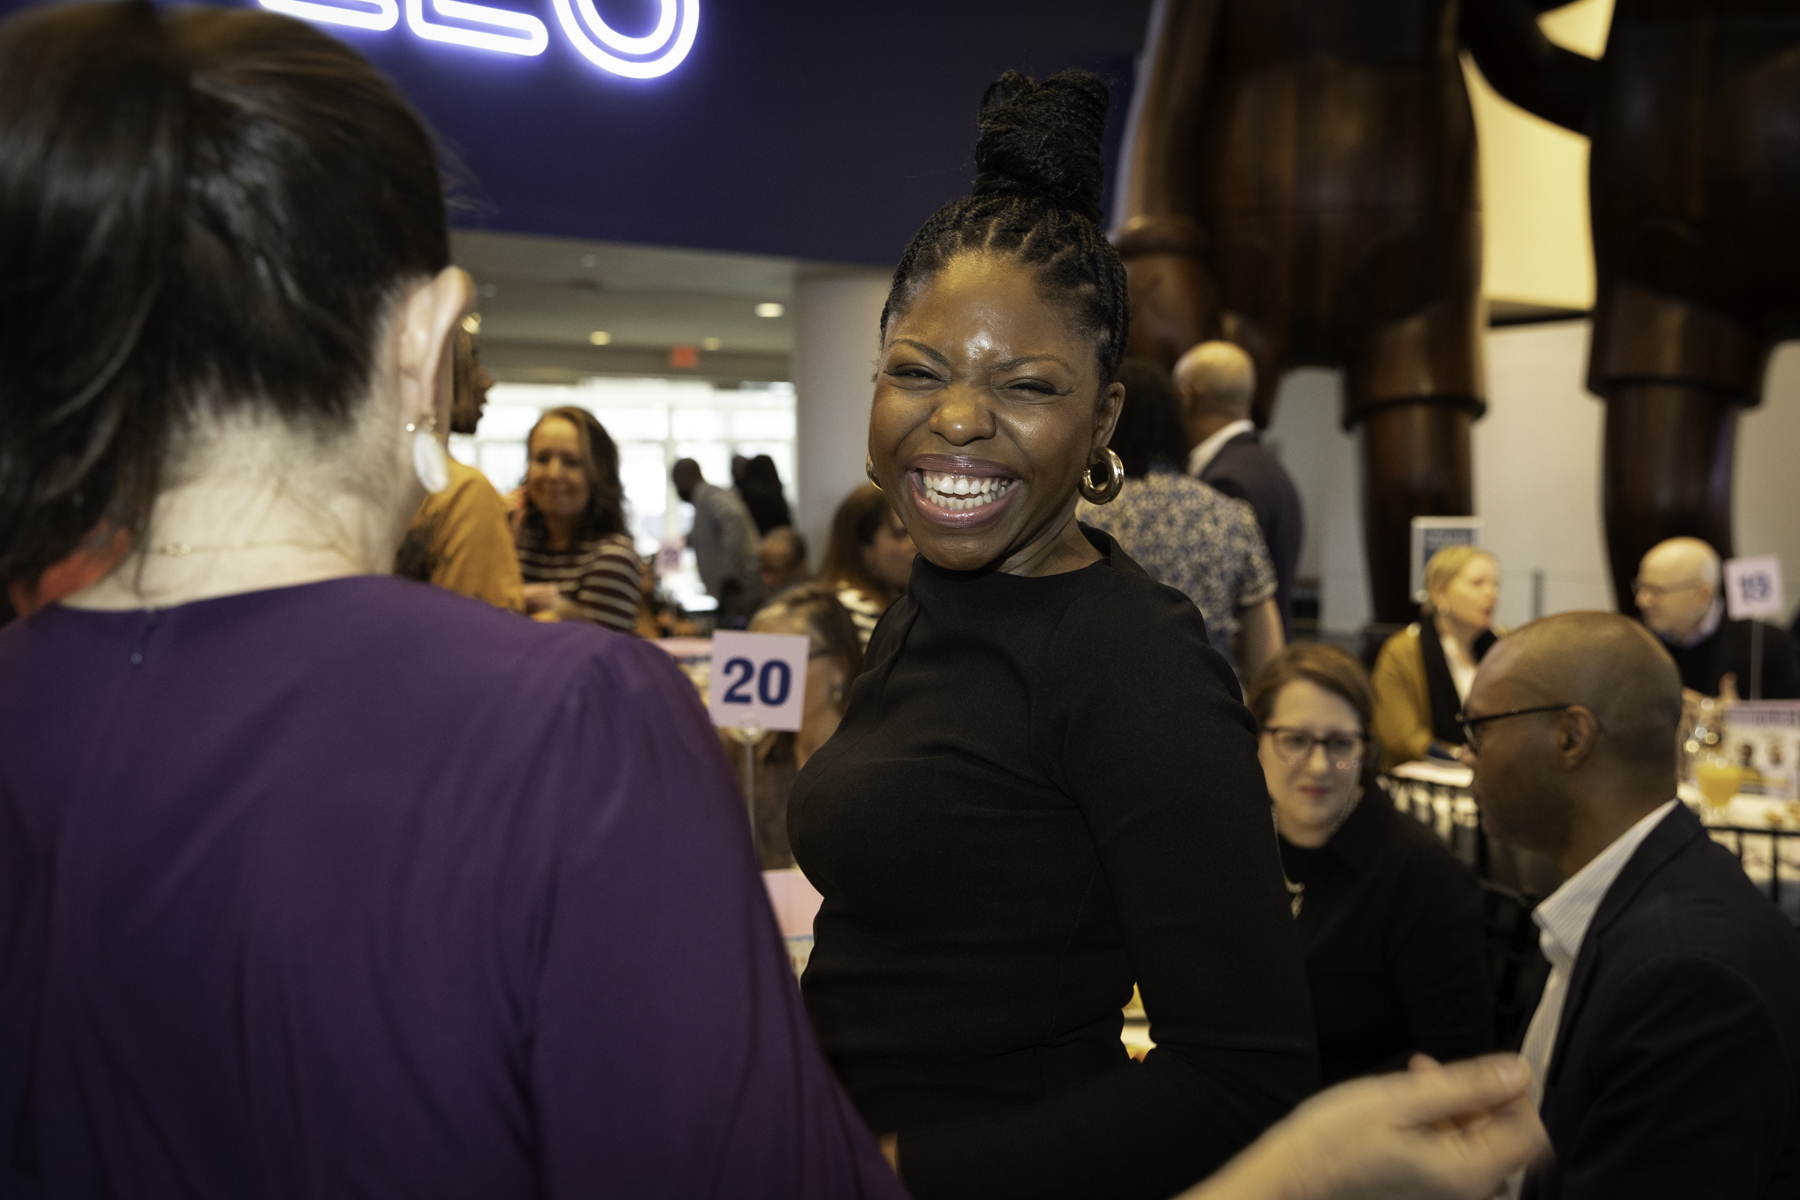 A woman with a joyful expression is engaged in a conversation at a social event.